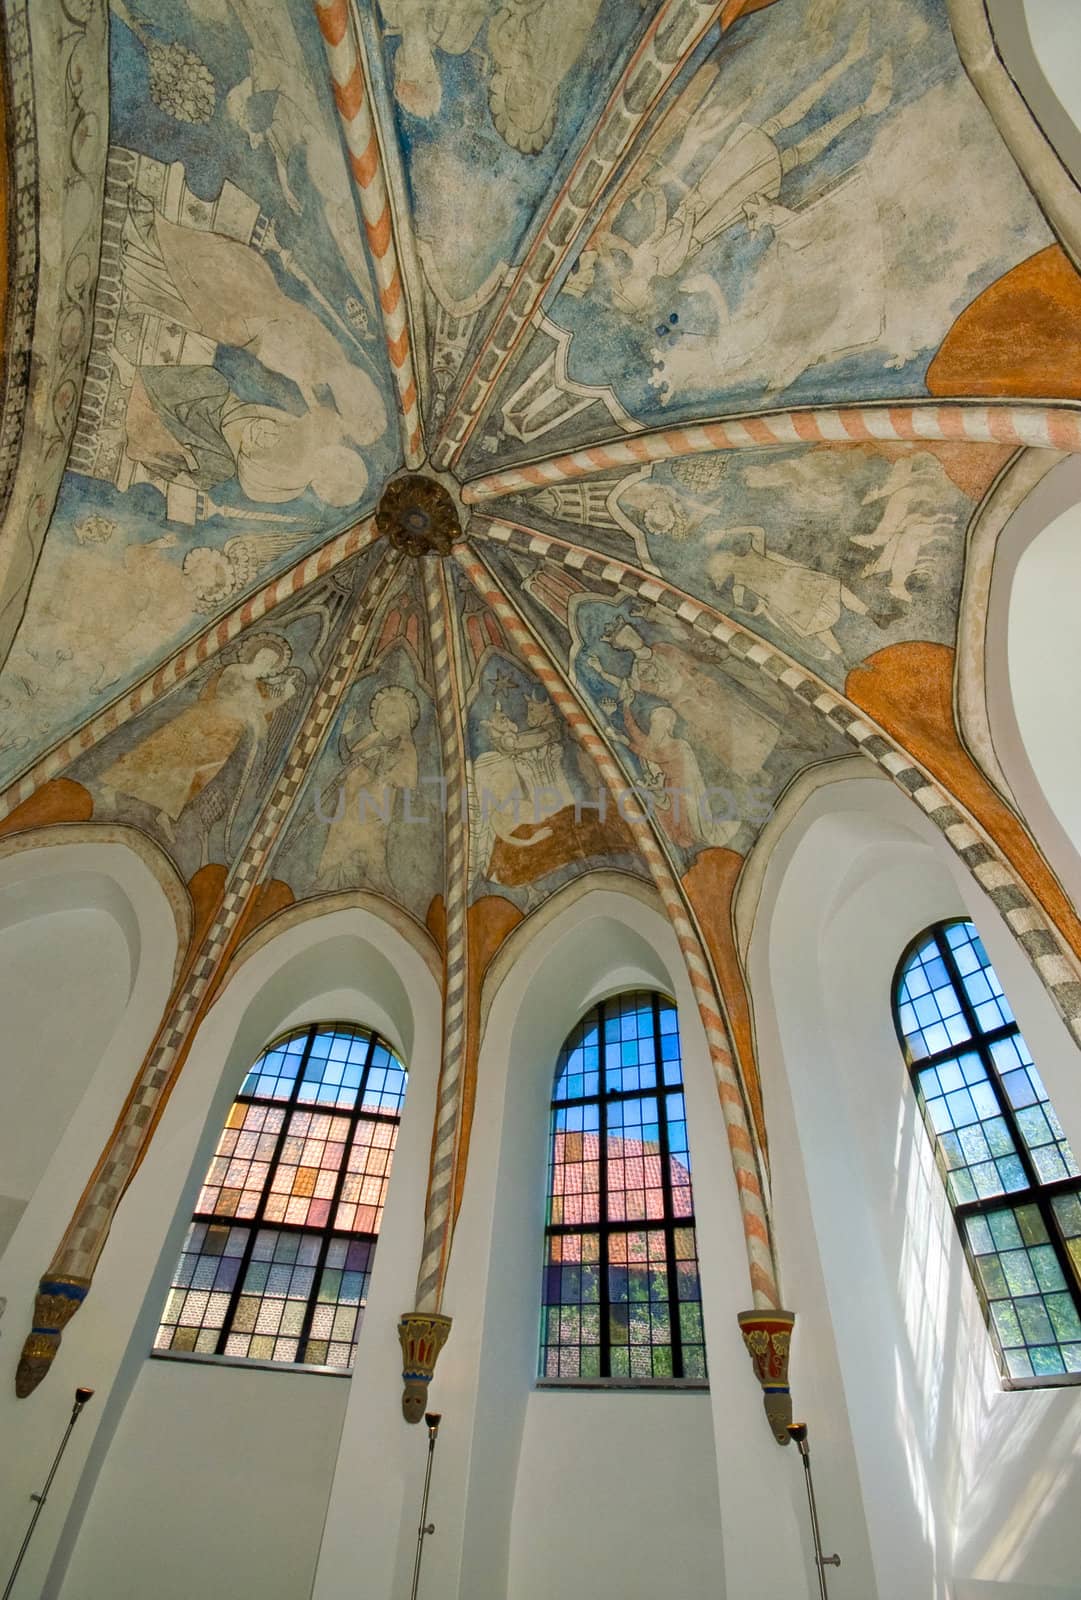 windows inside a church with frescos on the ceiling 